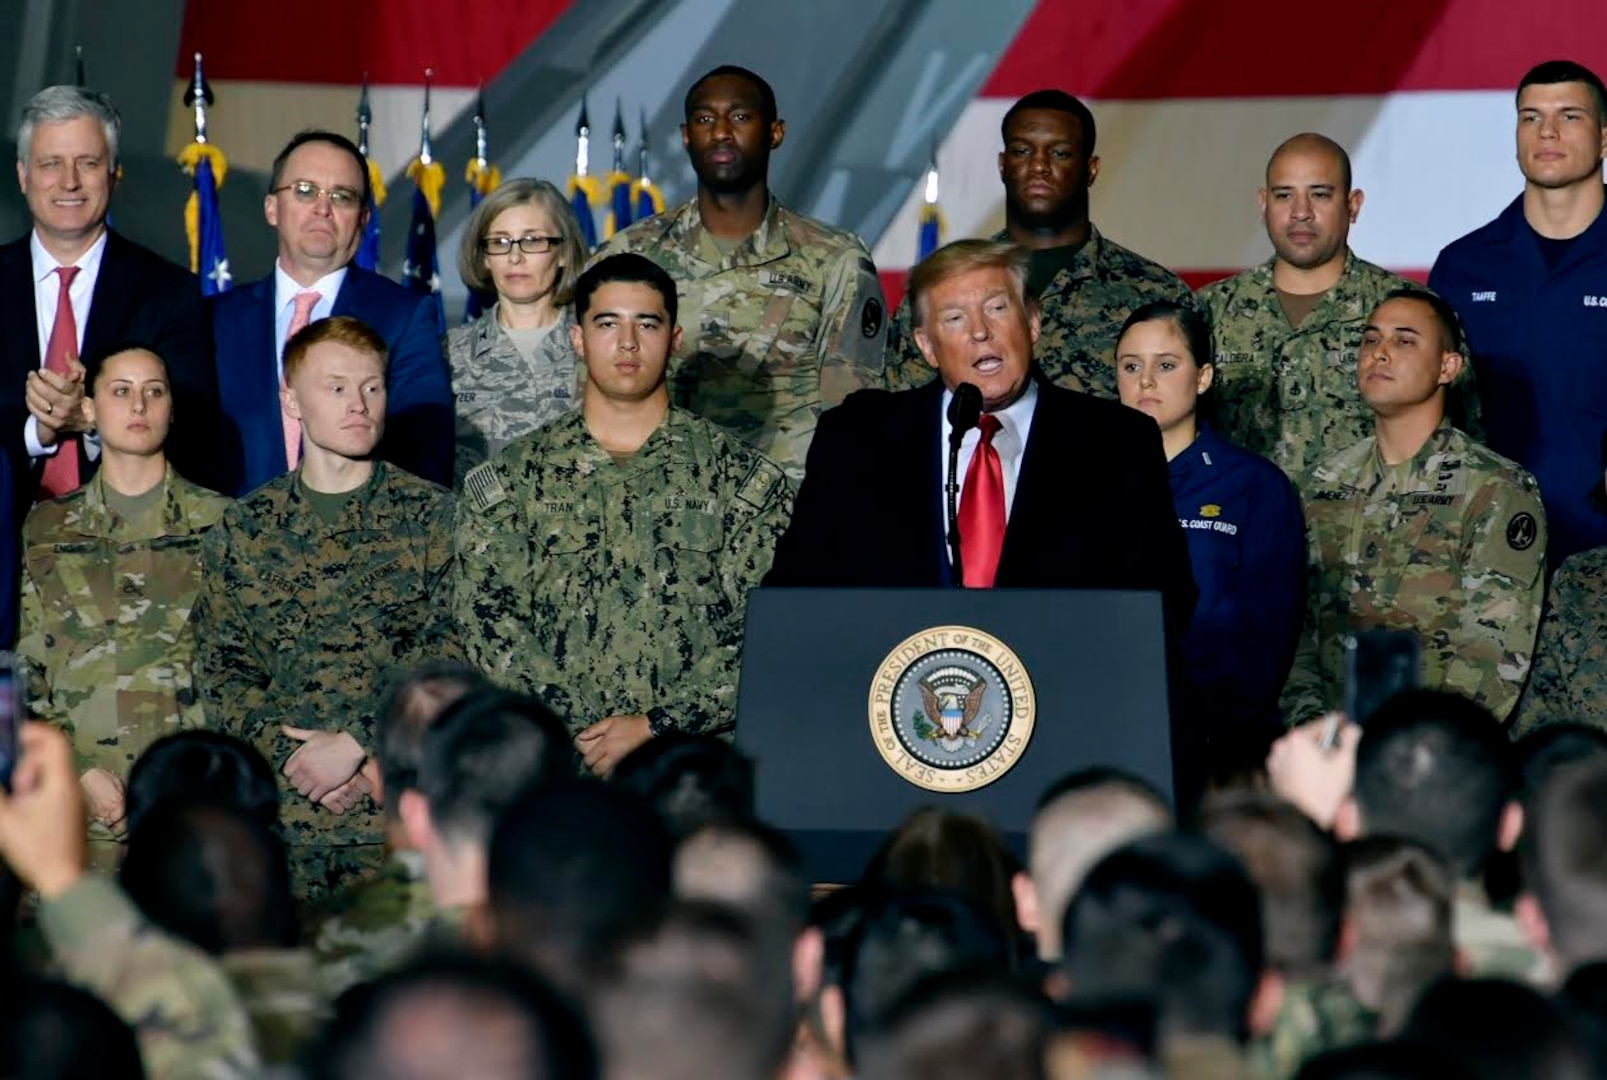 President Donald Trump speaks during an event at Joint Base Andrews, Maryland, Dec. 20, 2019. Trump visited Andrews to thank service members before signing the National Defense Authorization Act of 2020 which support the Air Force's advanced capabilities to gain and maintain air superiority and the Airmen that are essential to our nation's success.